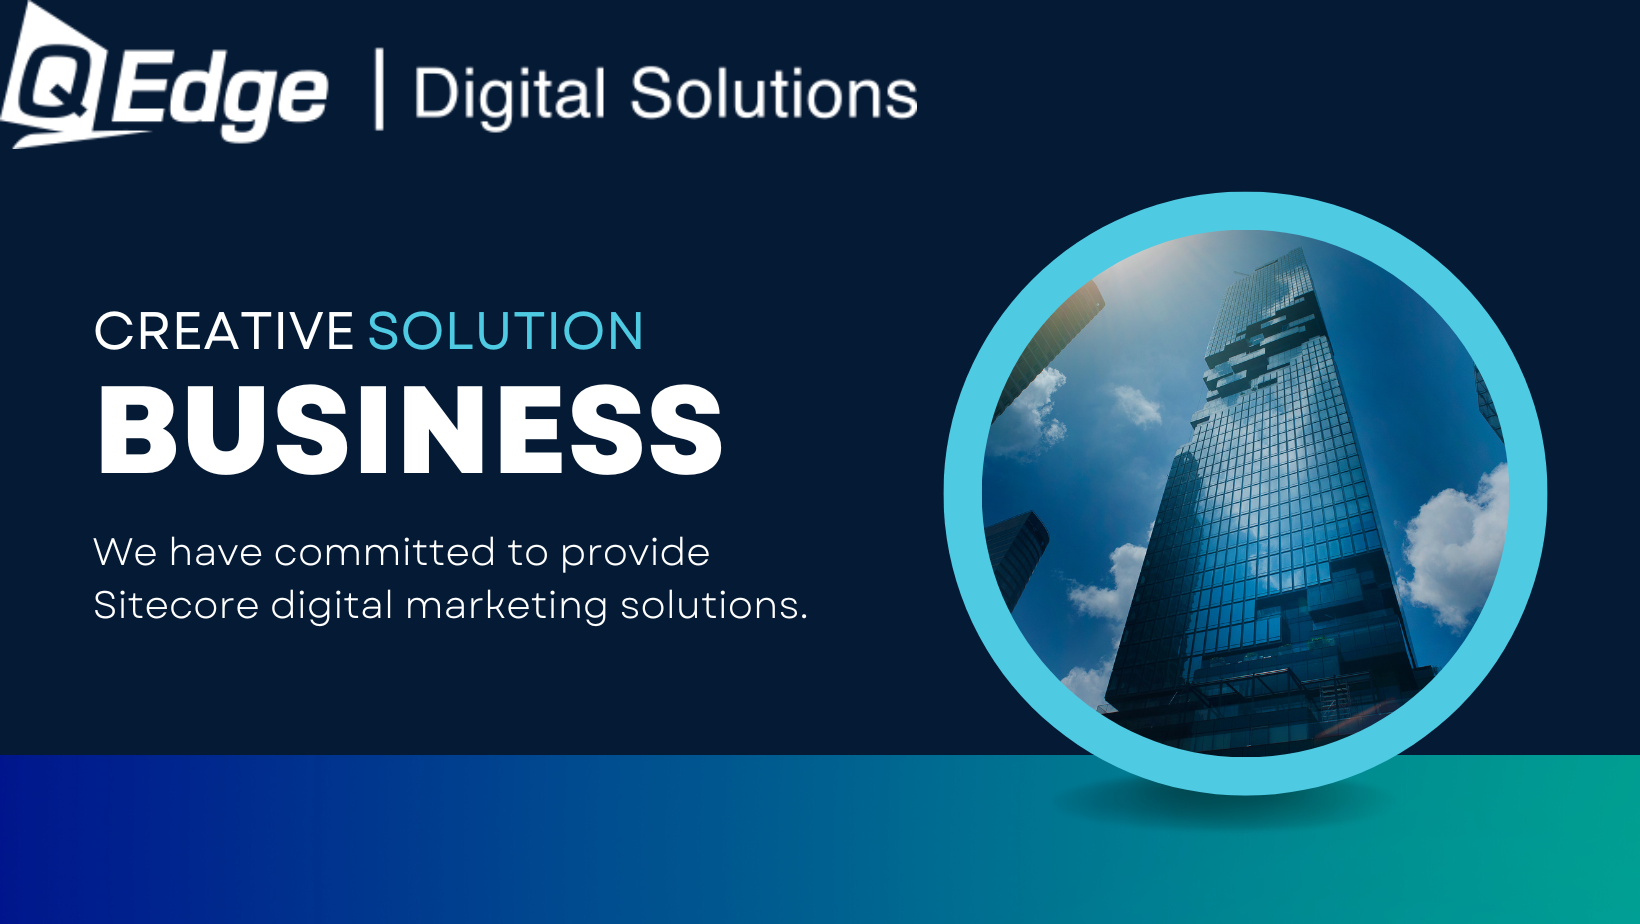 QEdge Digital Solutions is committed to provide Sitecore digital marketing solutions